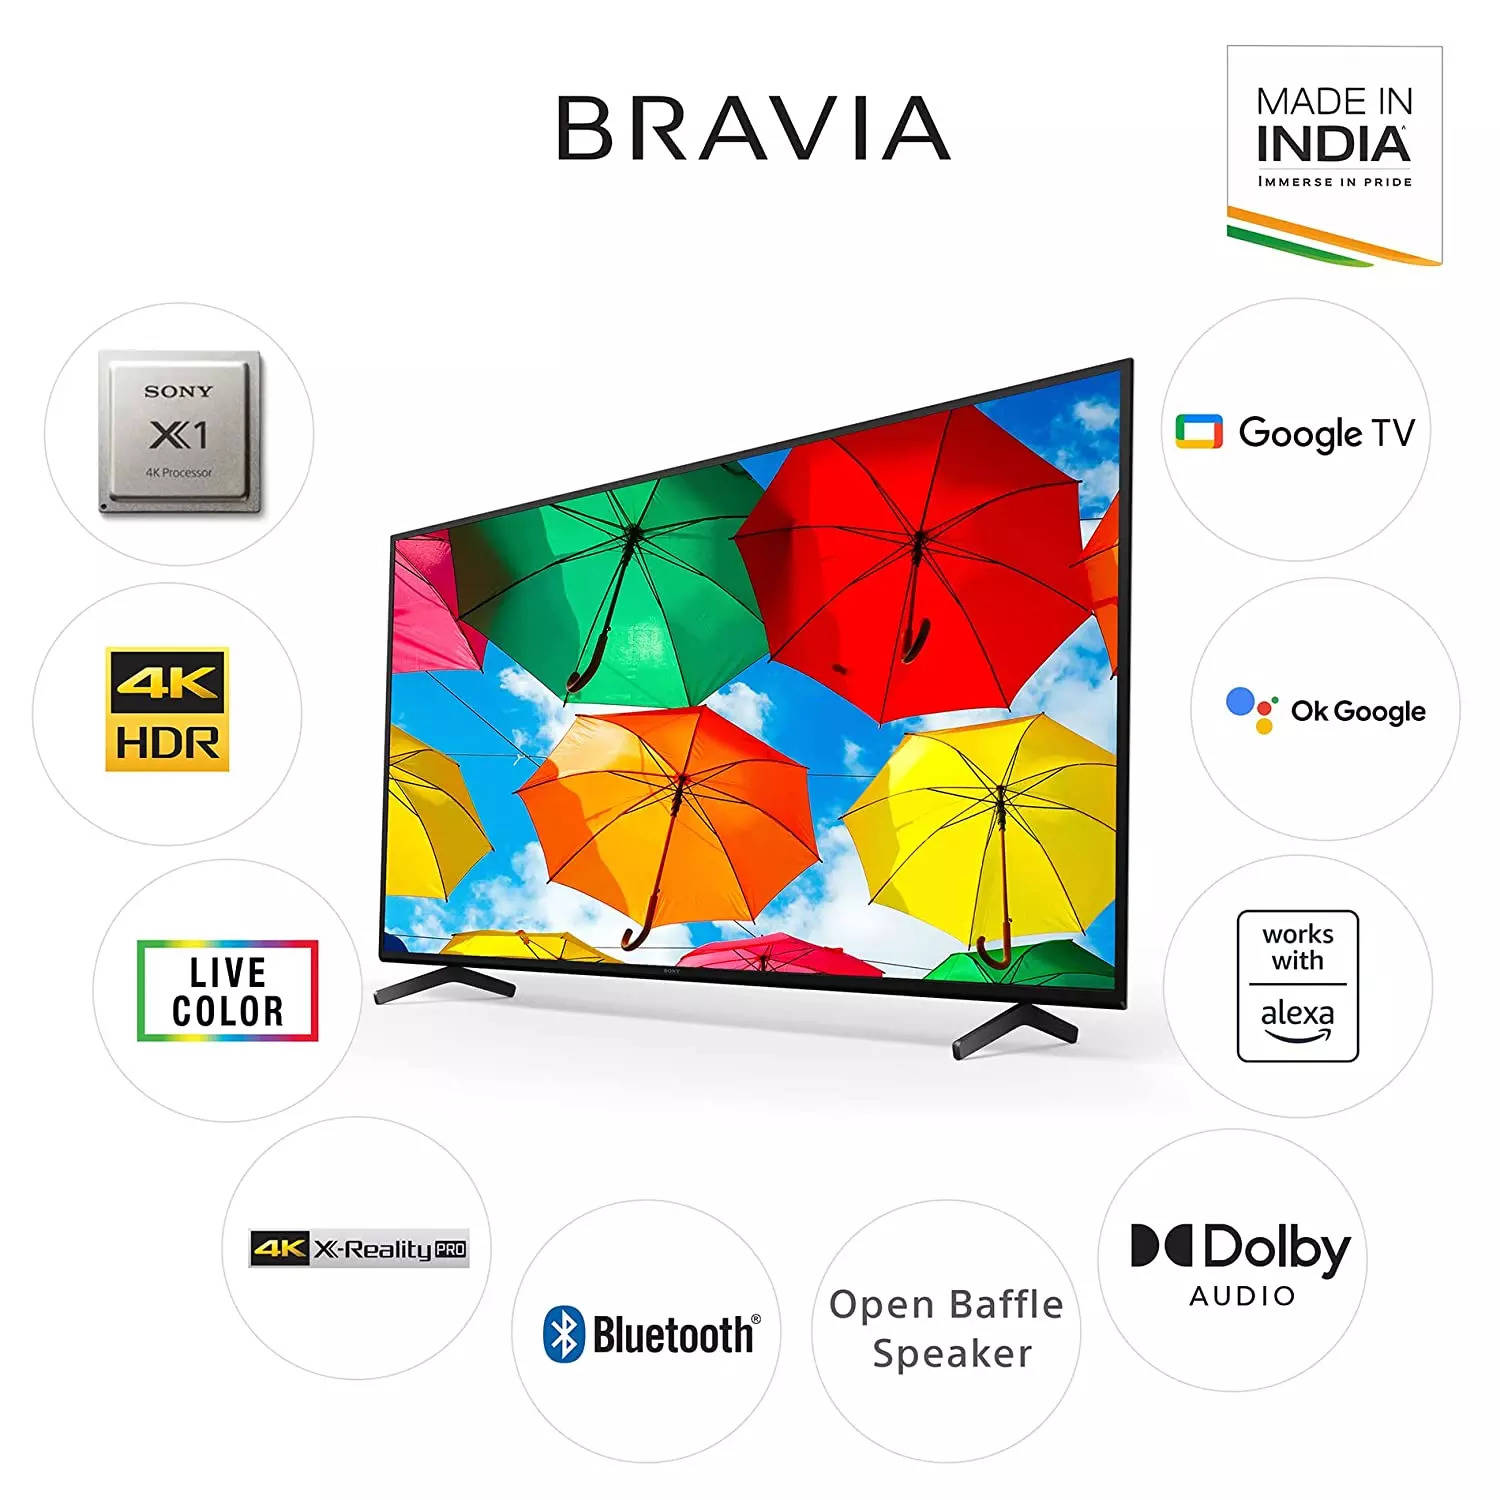 OEM Black 50 INCH SMART ANDROID LED TV, IPS at Rs 15800 in New Delhi